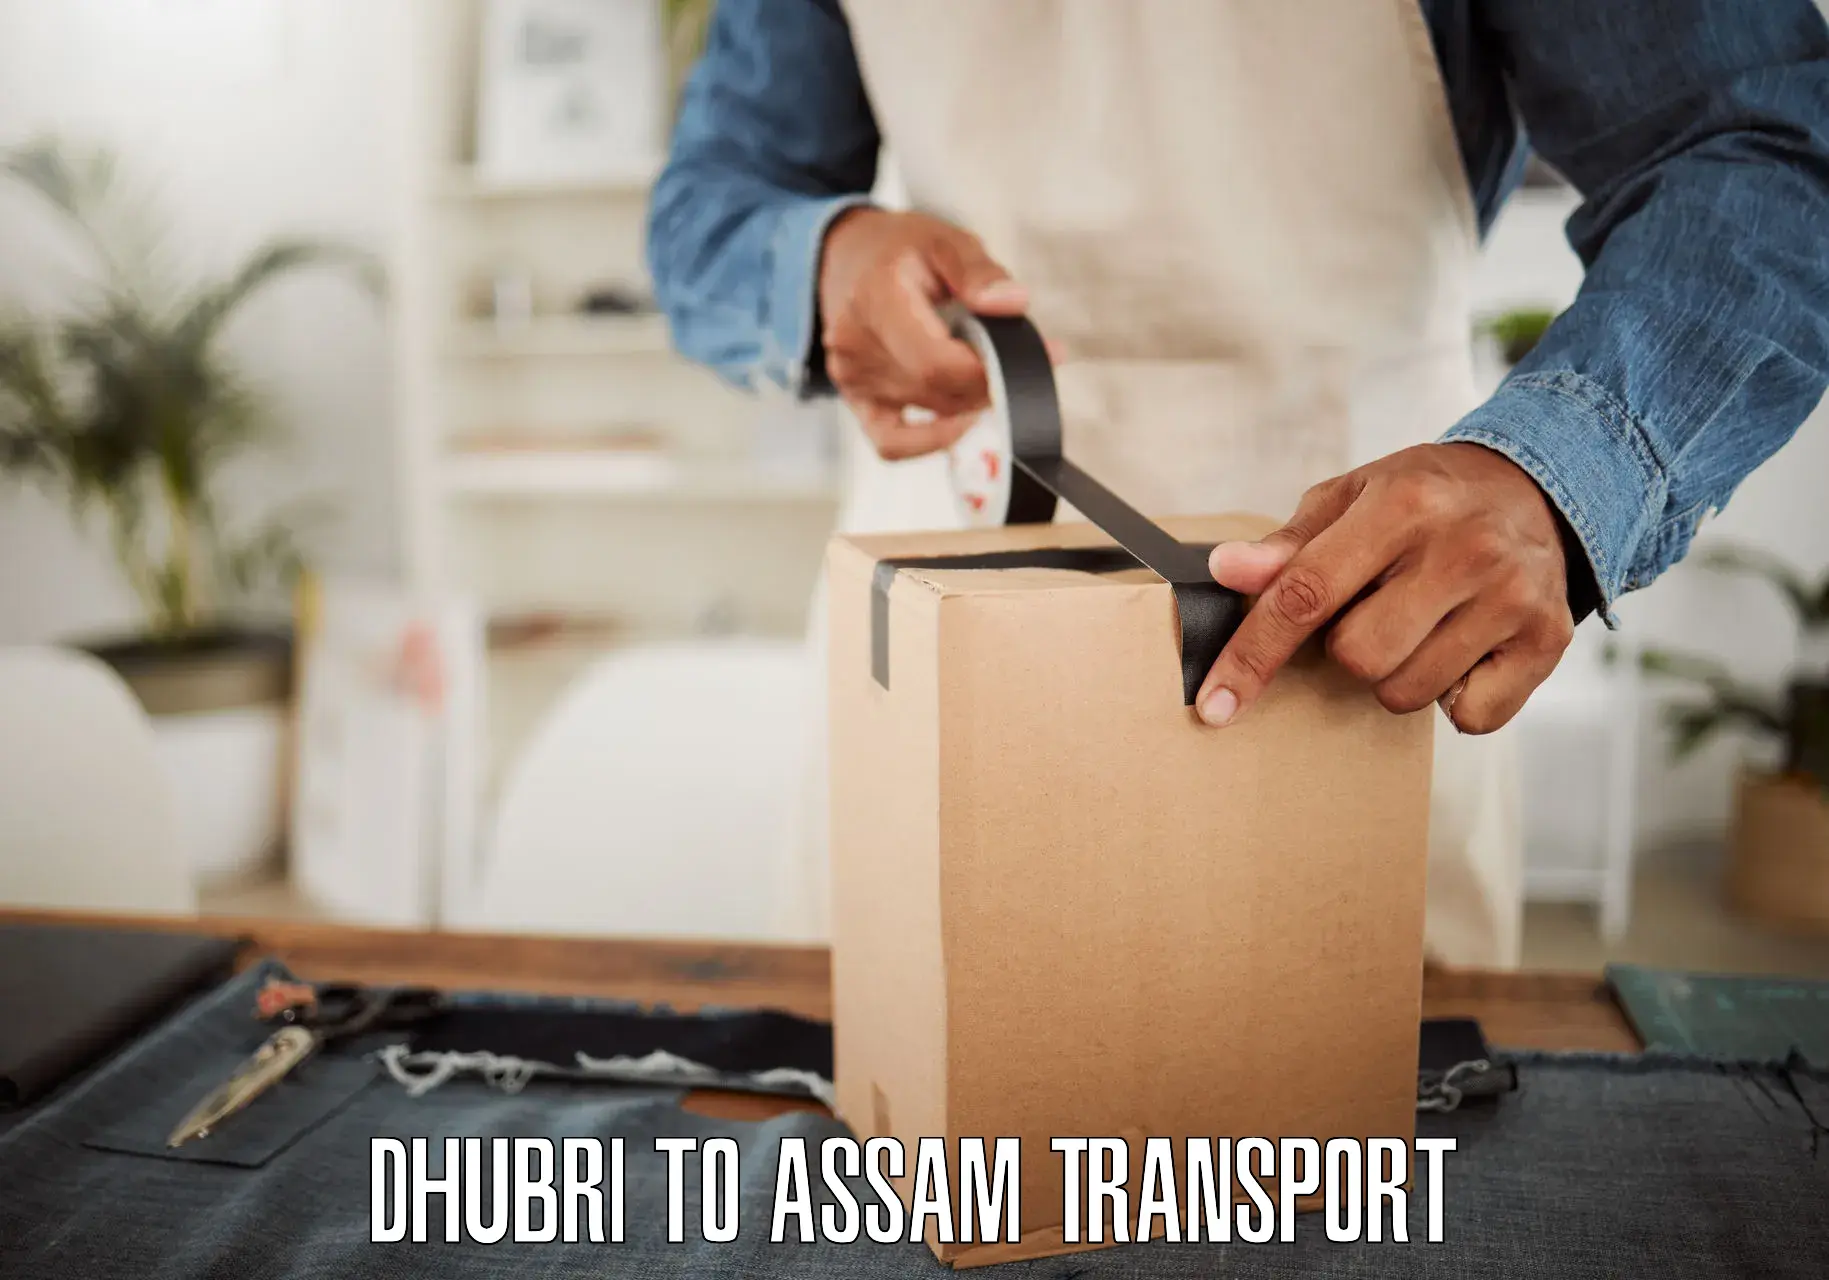 Delivery service Dhubri to Haflong